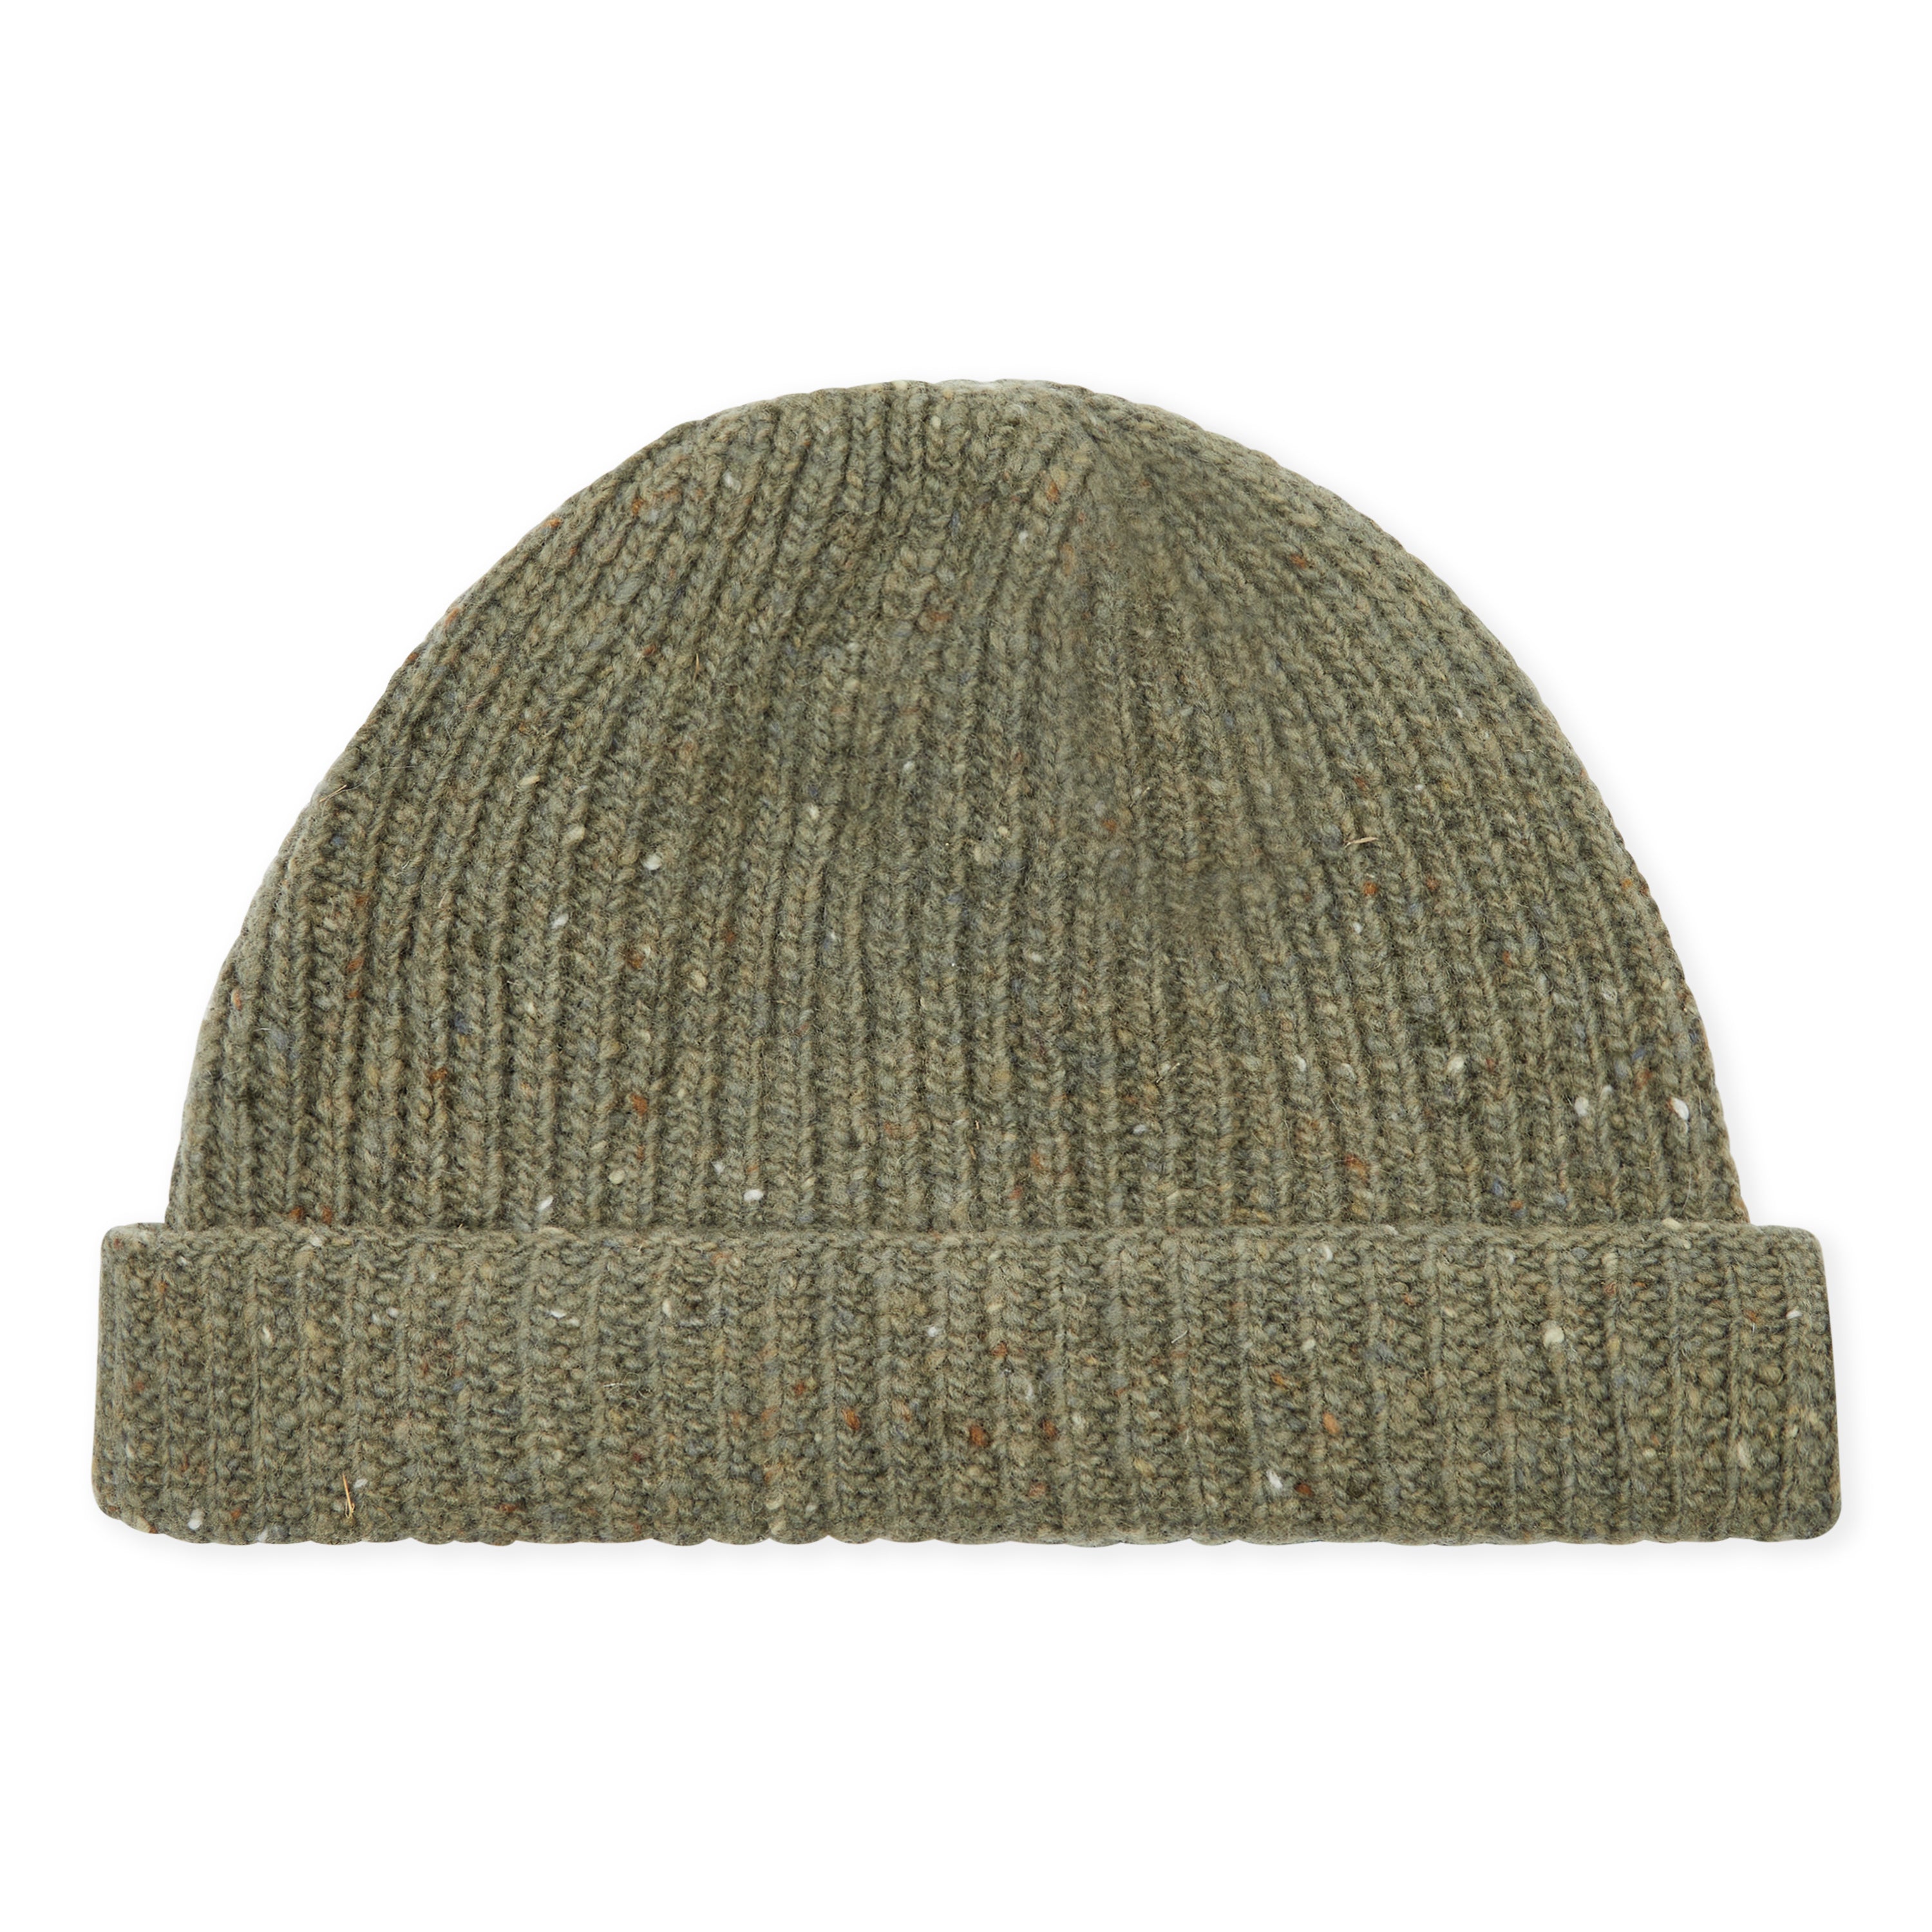 Trouva: Donegal Wool Beanie Hat - Pear